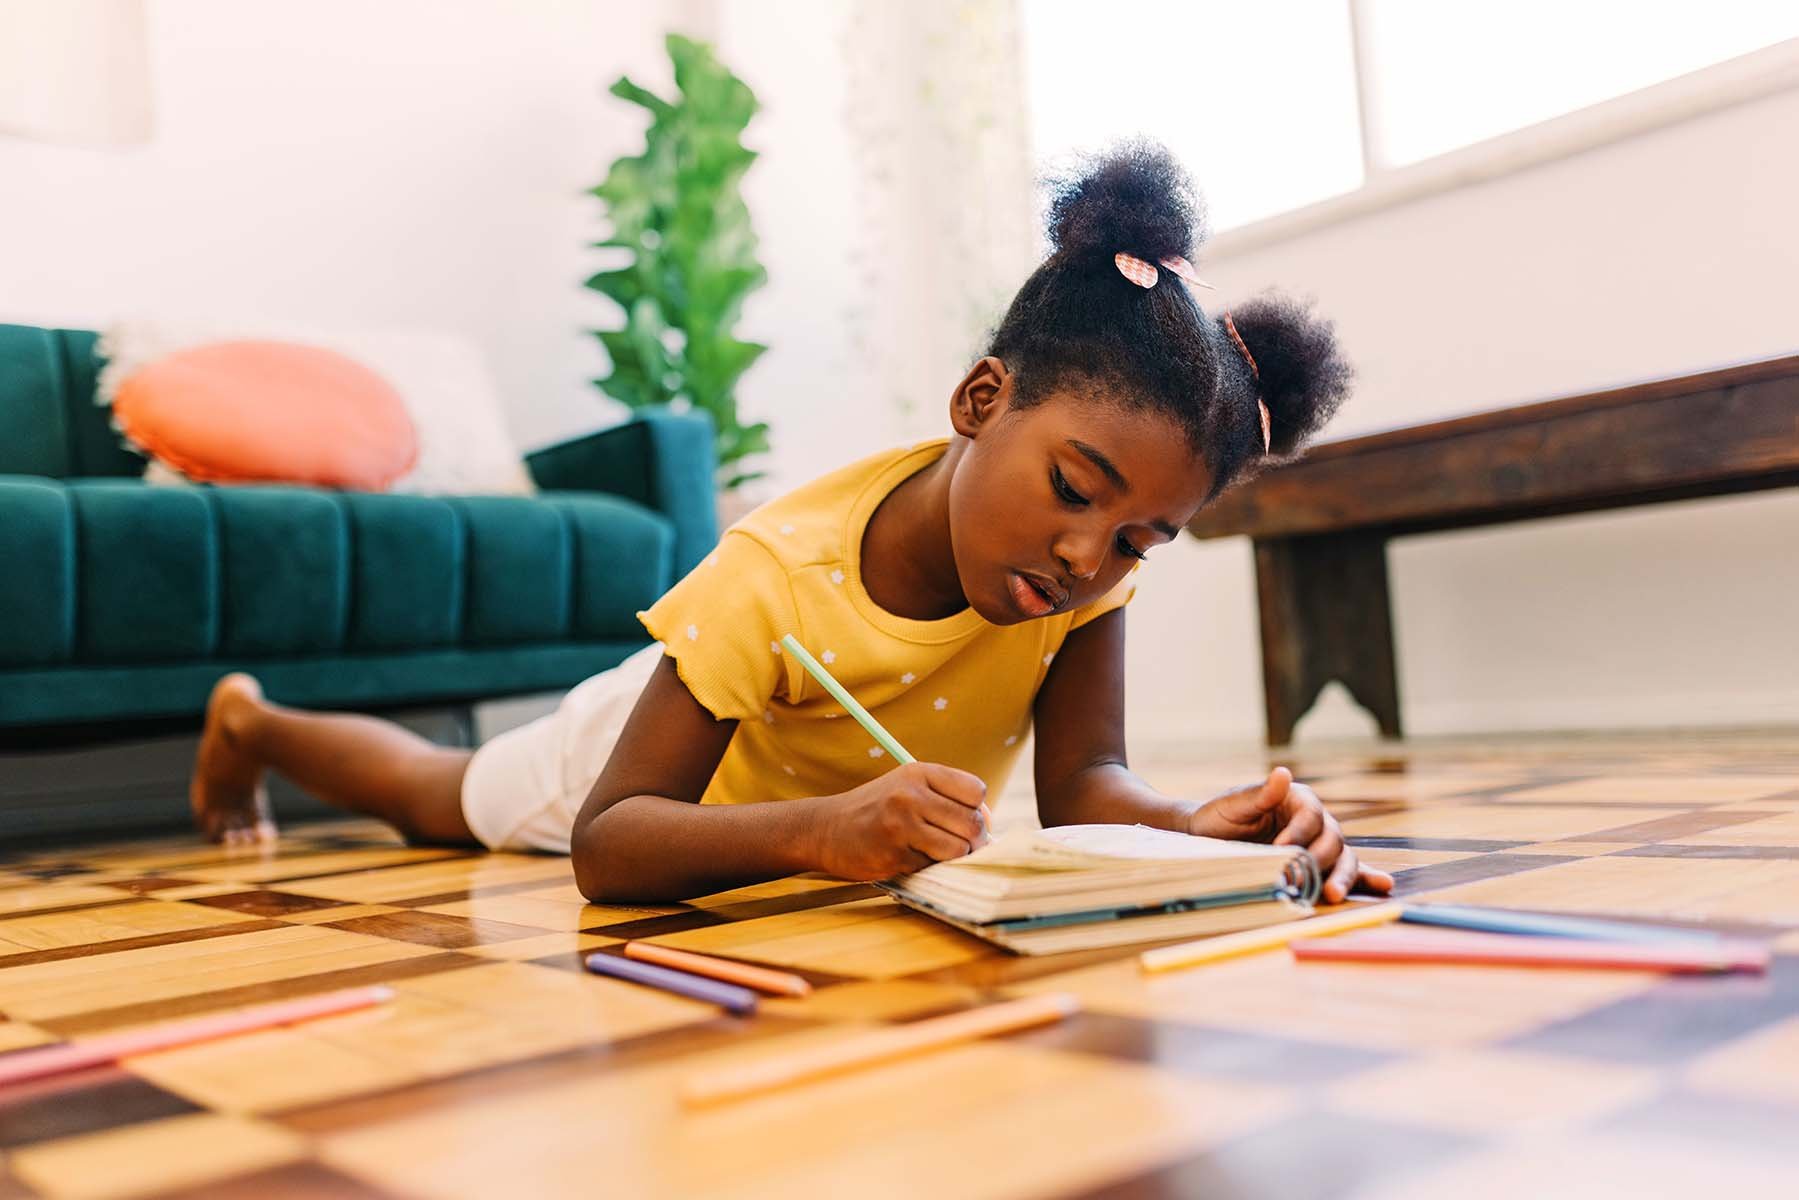 Child drawing on the floor with colored pencils.